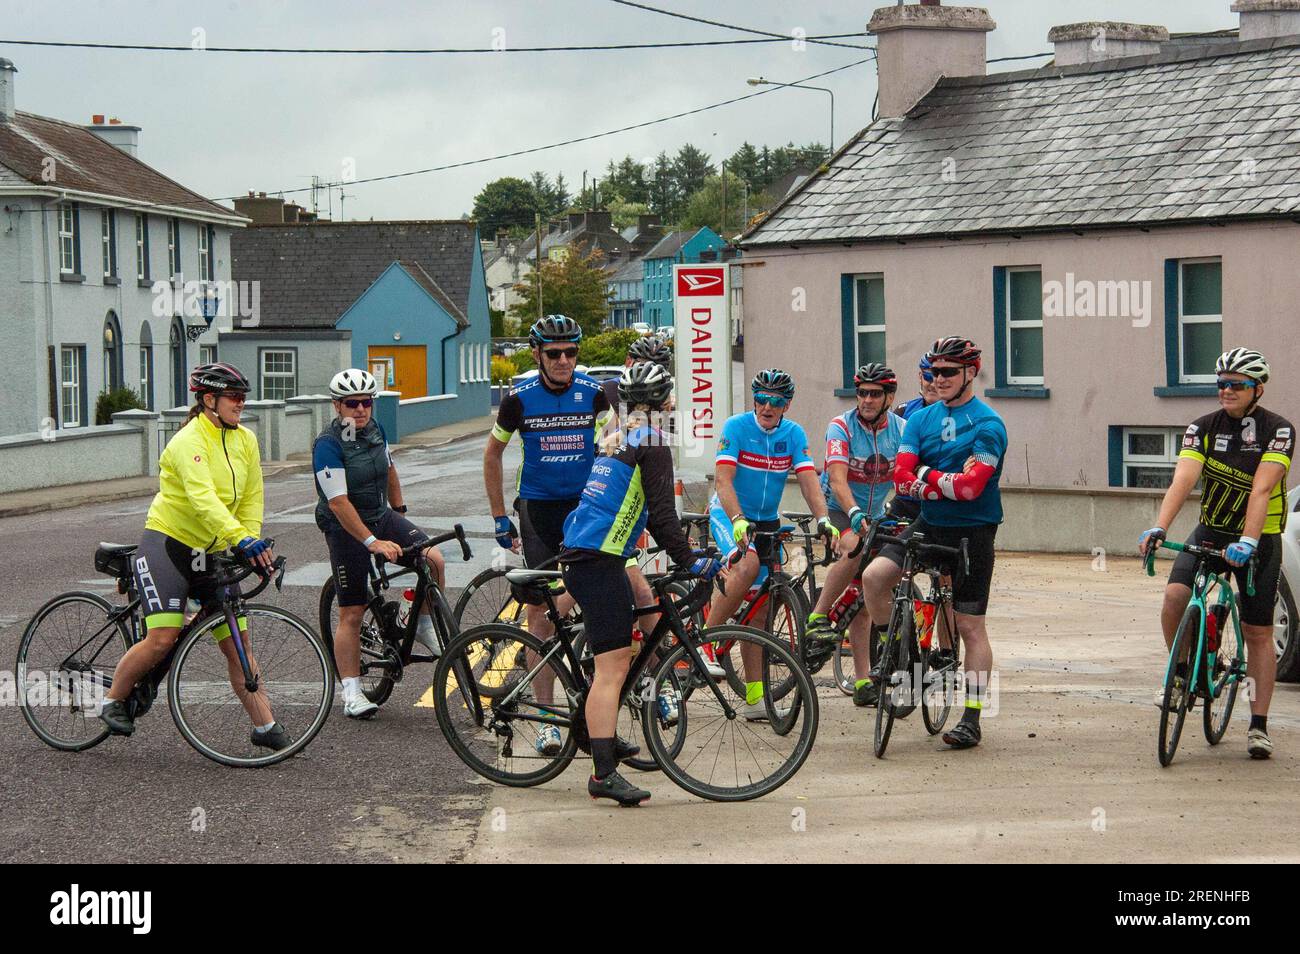 Saturday 29 Jul 2023 Drimoleague, West Cork, Ireland; A charity cycle was held in Drimoleague today. The Mizen Loopers Cycle, in aid of the West Cork Down Syndrome Centre started at Collin’s Centra and had 2 separate routes, a 180km route and a 90km route. Some 50 cyclists took part in the event with some taking off before the main group. Cyclists from across Cork took part. Credit ED/Alamy Live News Stock Photo